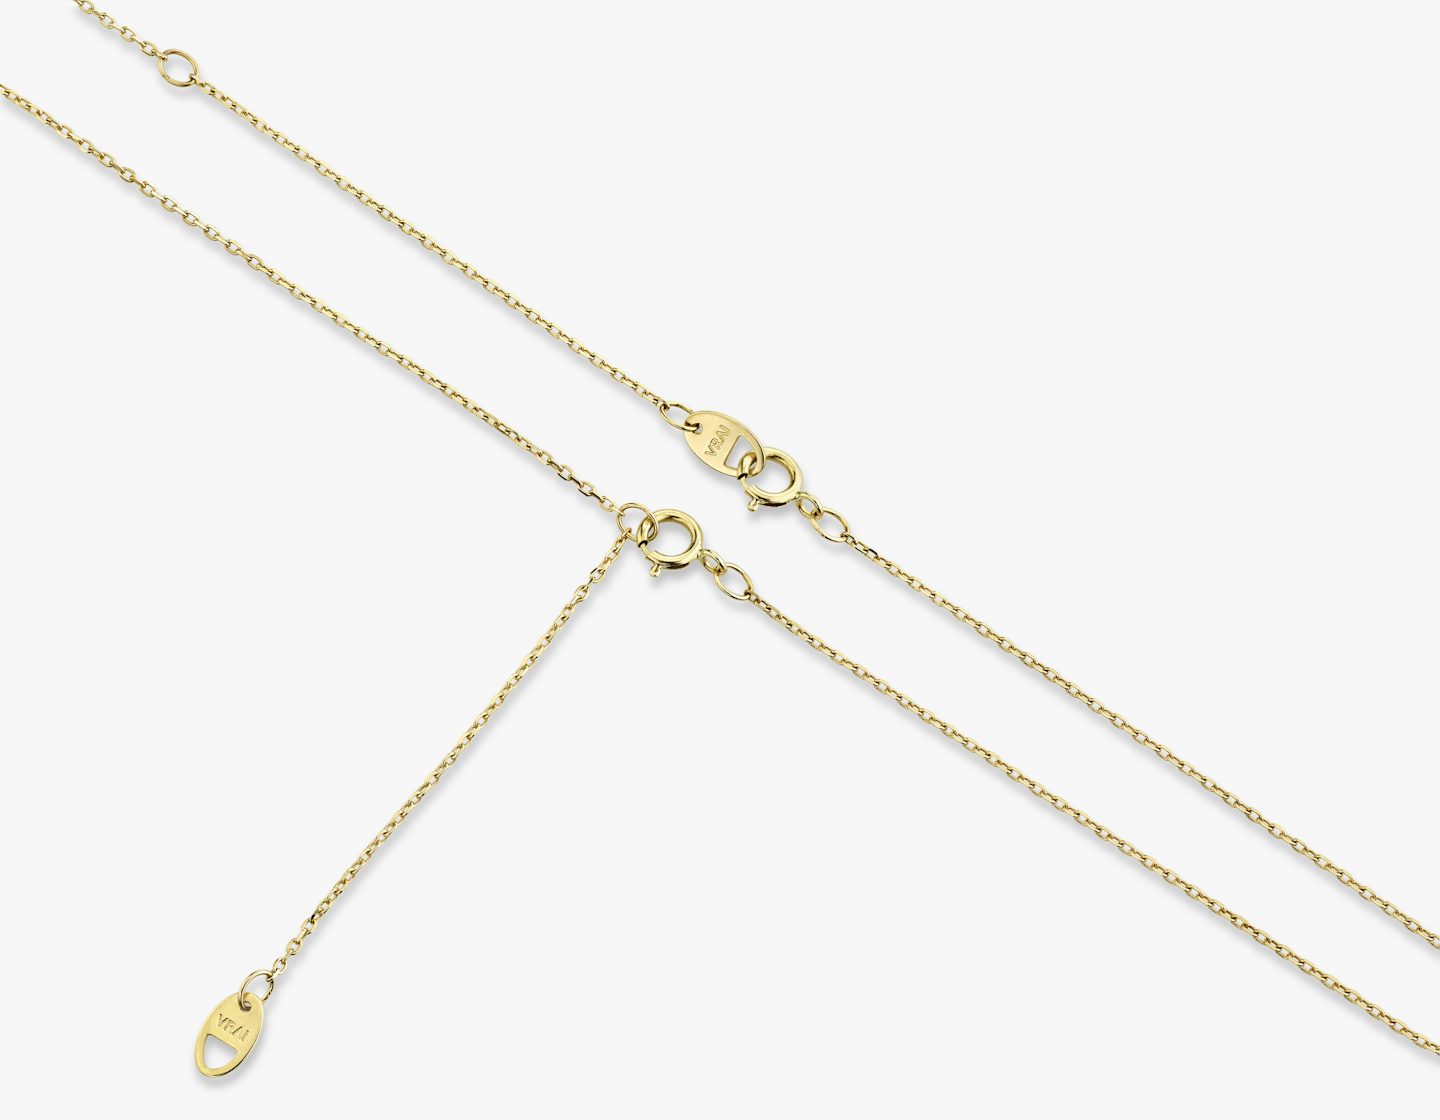 Orion Necklace | Round Brilliant, Baguette and Marquise | 14k | 18k Yellow Gold | Chain length: 16-18 | Diamond size: Original